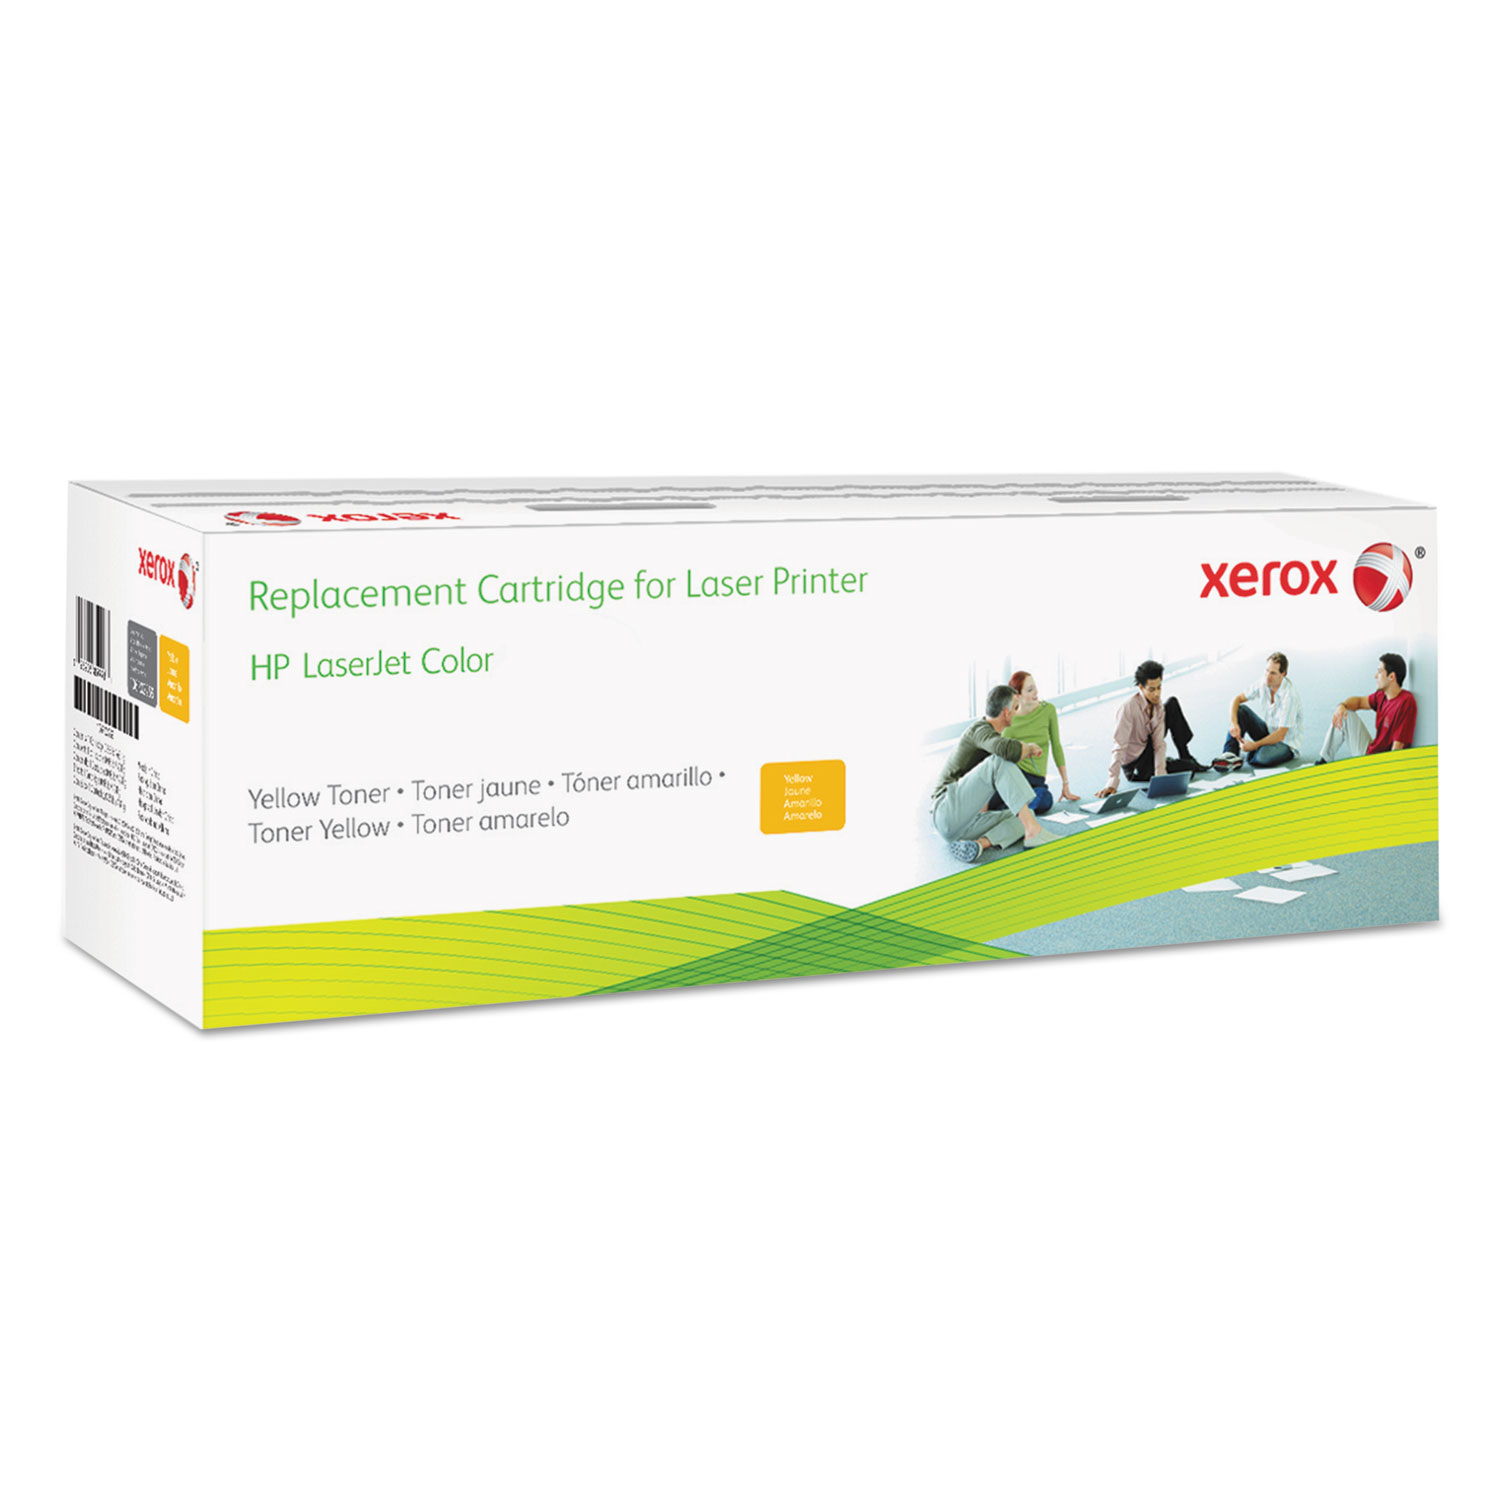  Xerox 006R03254 006R03254 Remanufactured CF382A (312A) Toner, 2800 Page-Yield, Yellow (XER006R03254) 